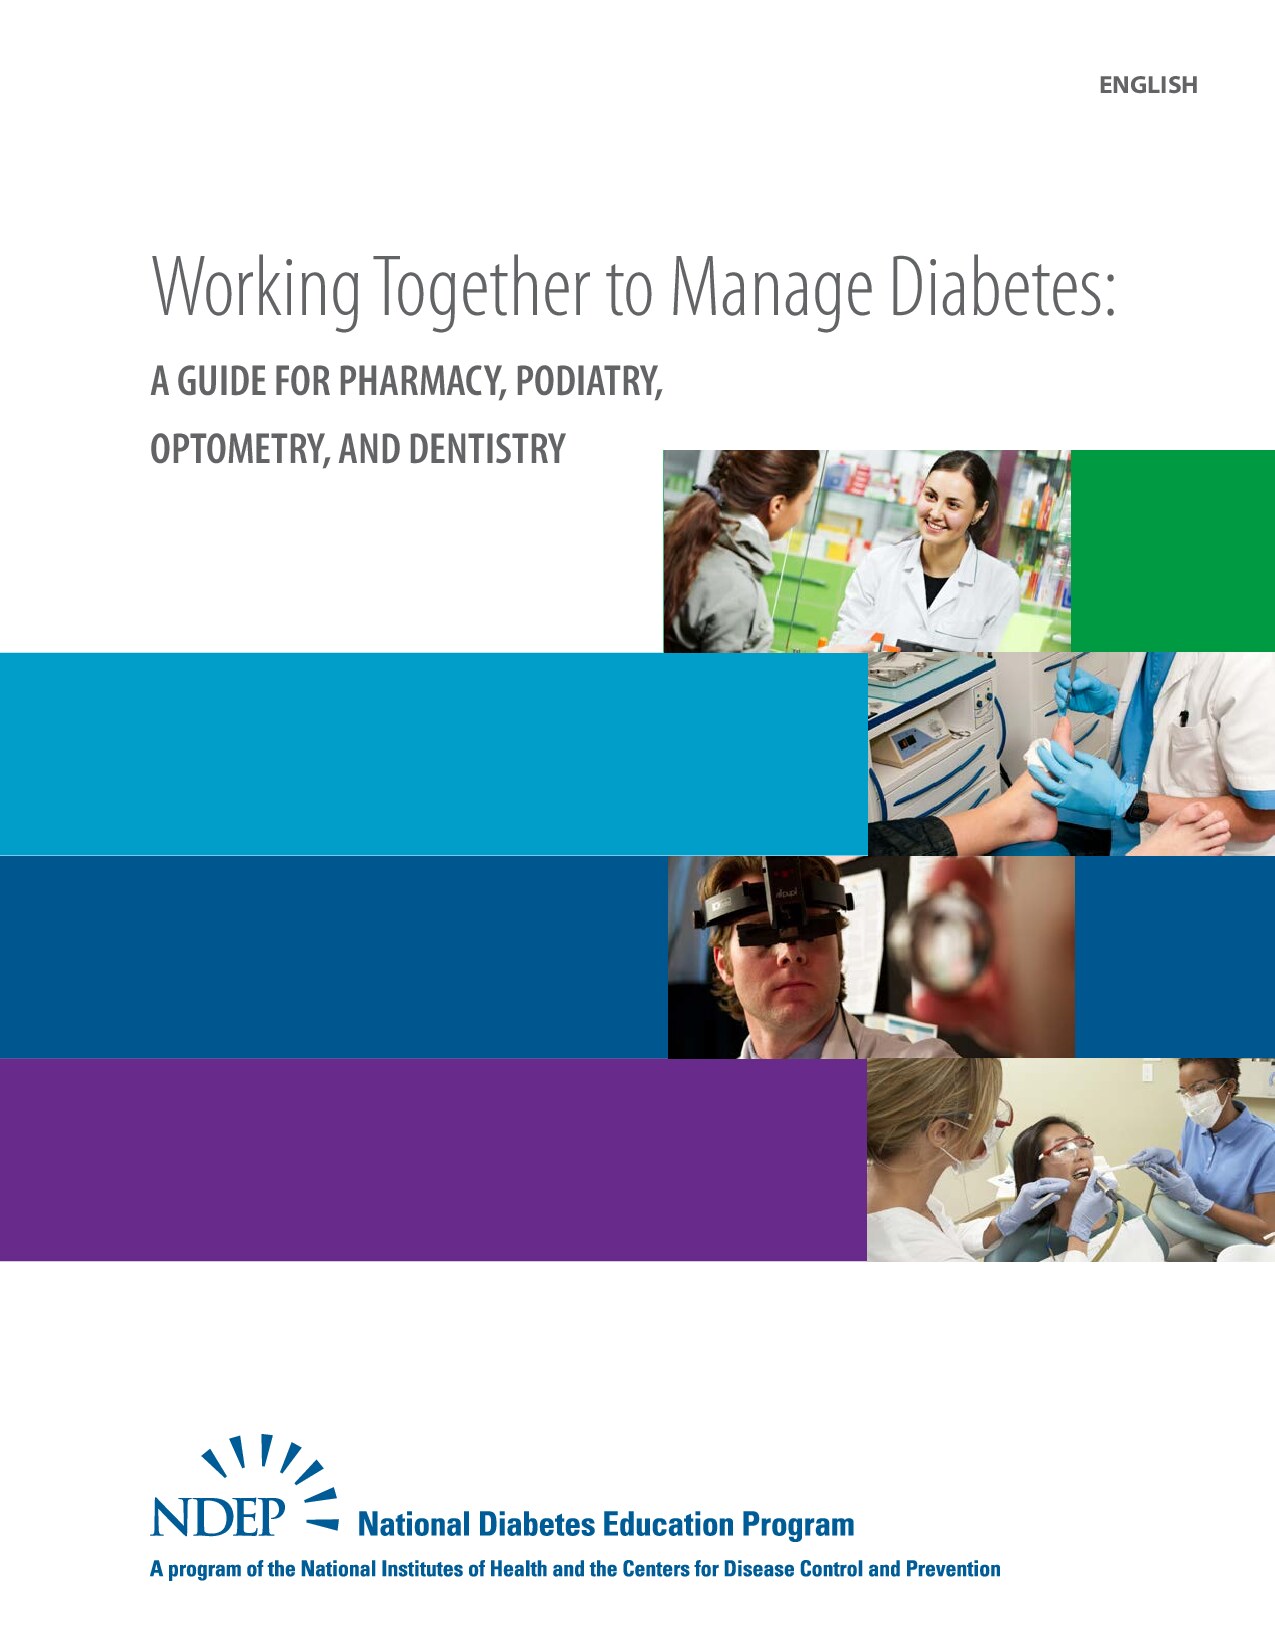 Working Together to Manage Diabetes: A Guide for Pharmacy, Podiatry, Optometry and Dentistry